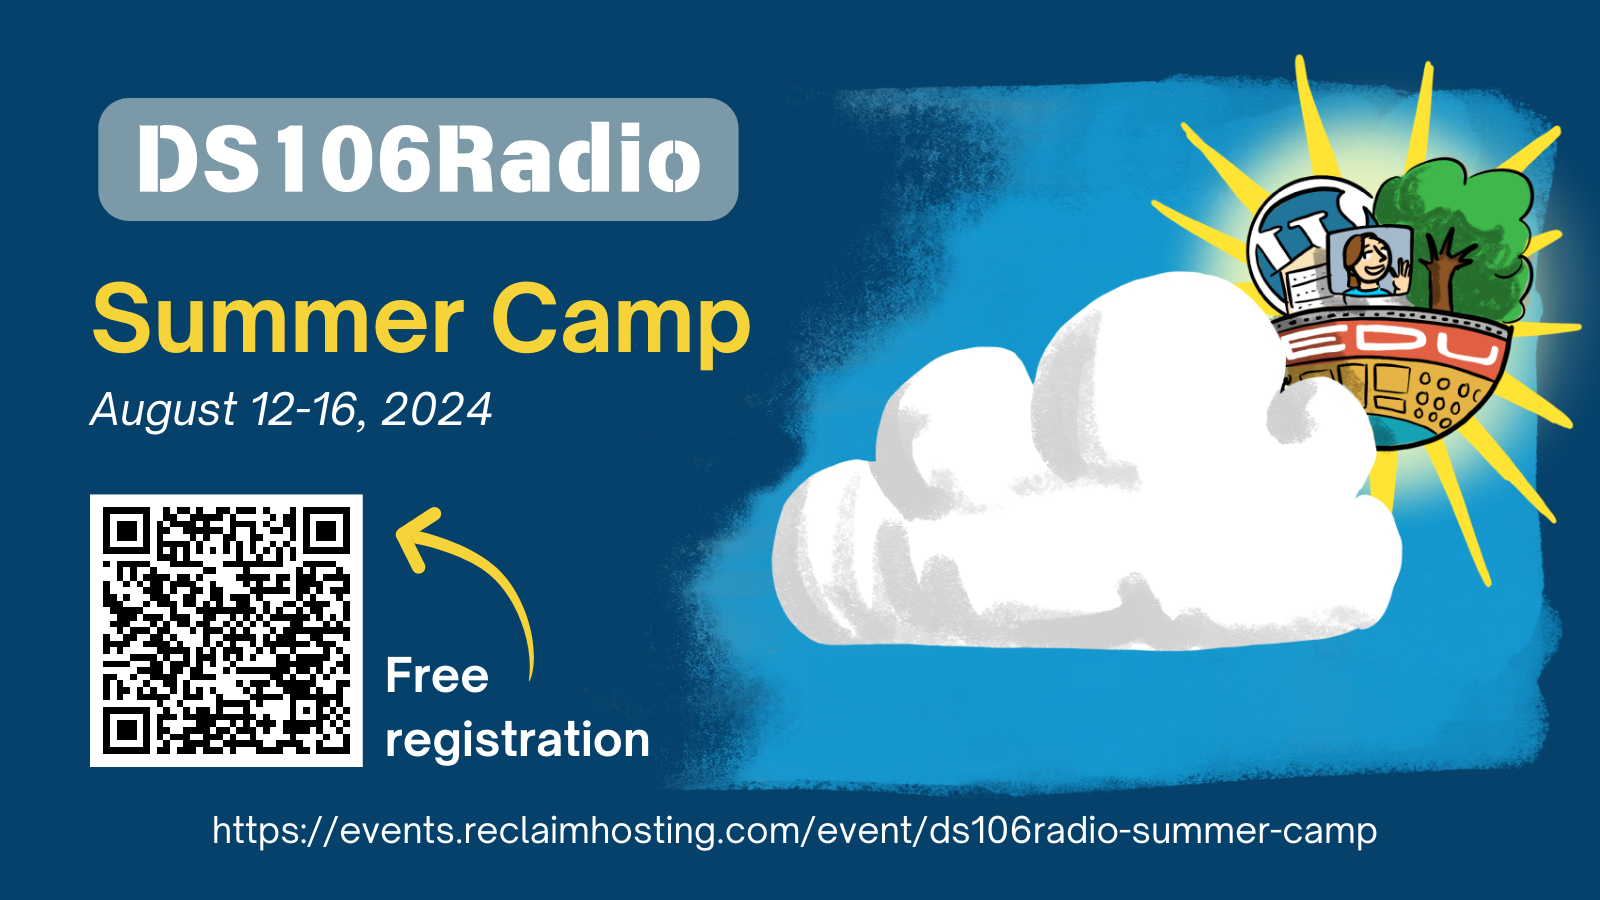 Card for DS106 Radio Summer Camp, with a QR code & link to registration on the events calendar. Dates listed are August 12-16, 2024.